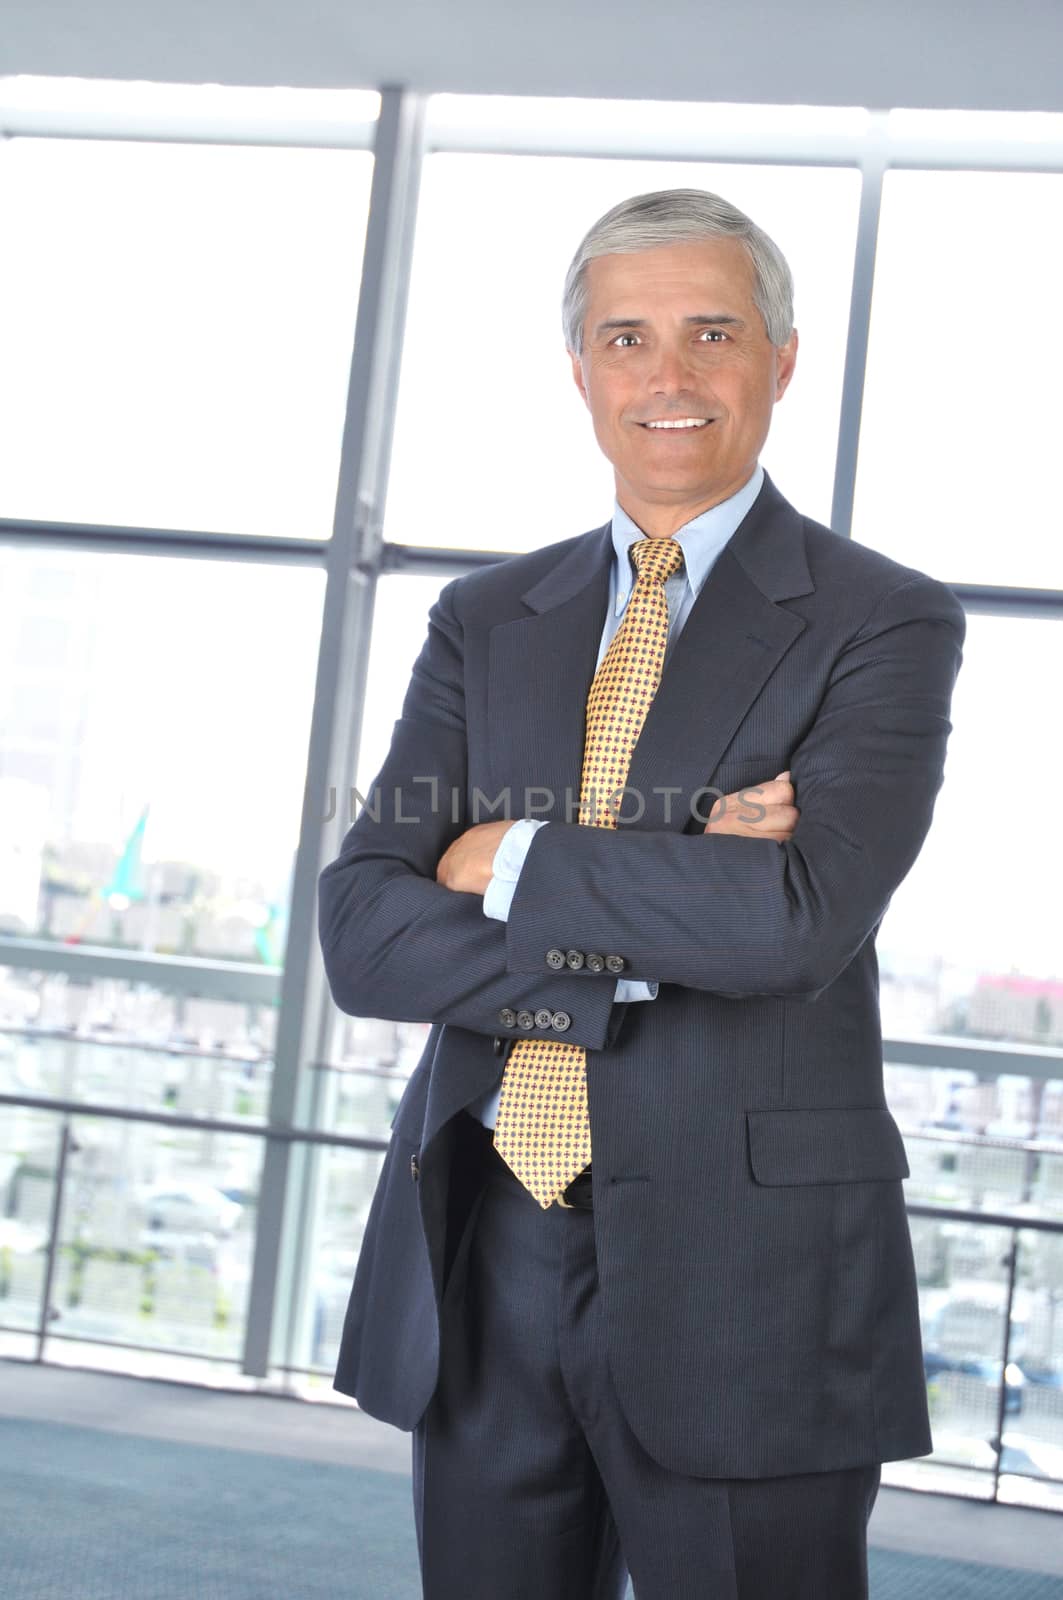 Smiling Middle aged Businessman in dark suit standing with his arms crossed in office setting